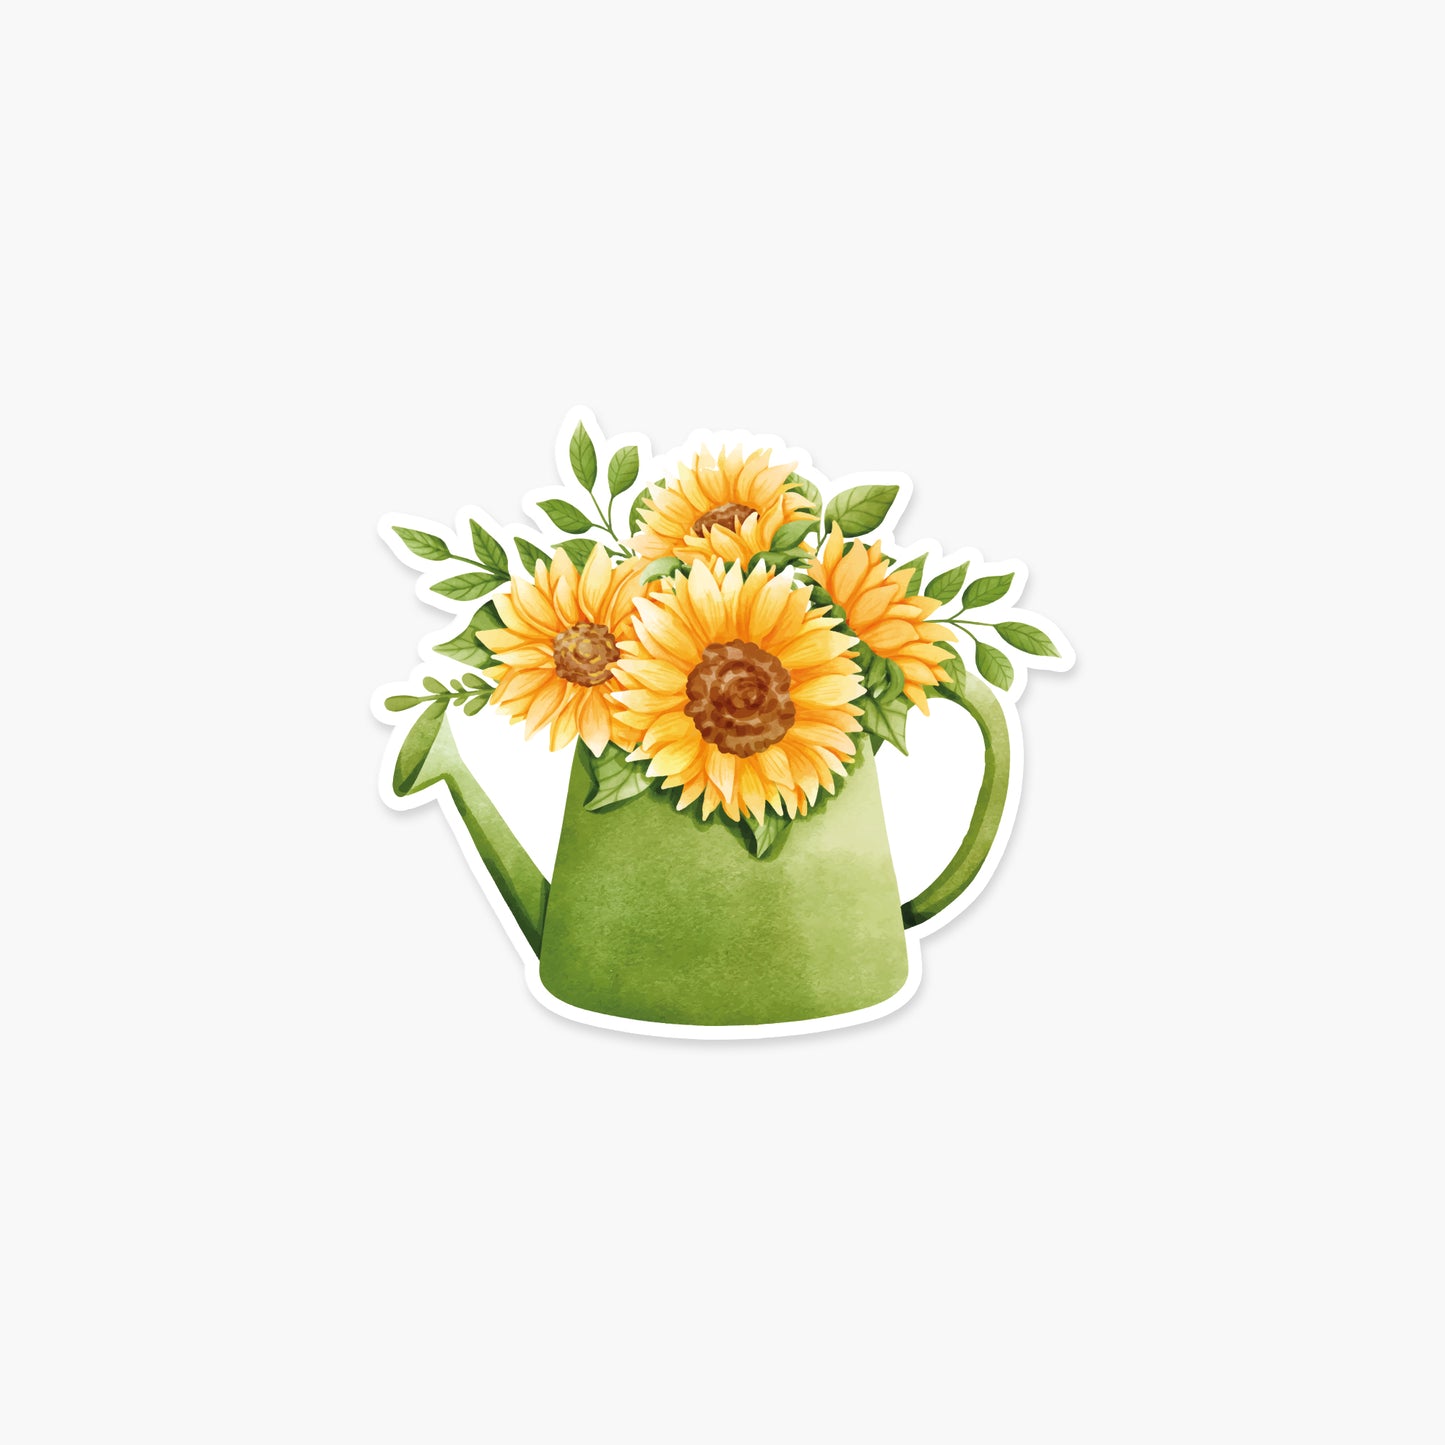 Sunflowers in a Green Flowering Pot - Floral Sticker | Footnotes Paper